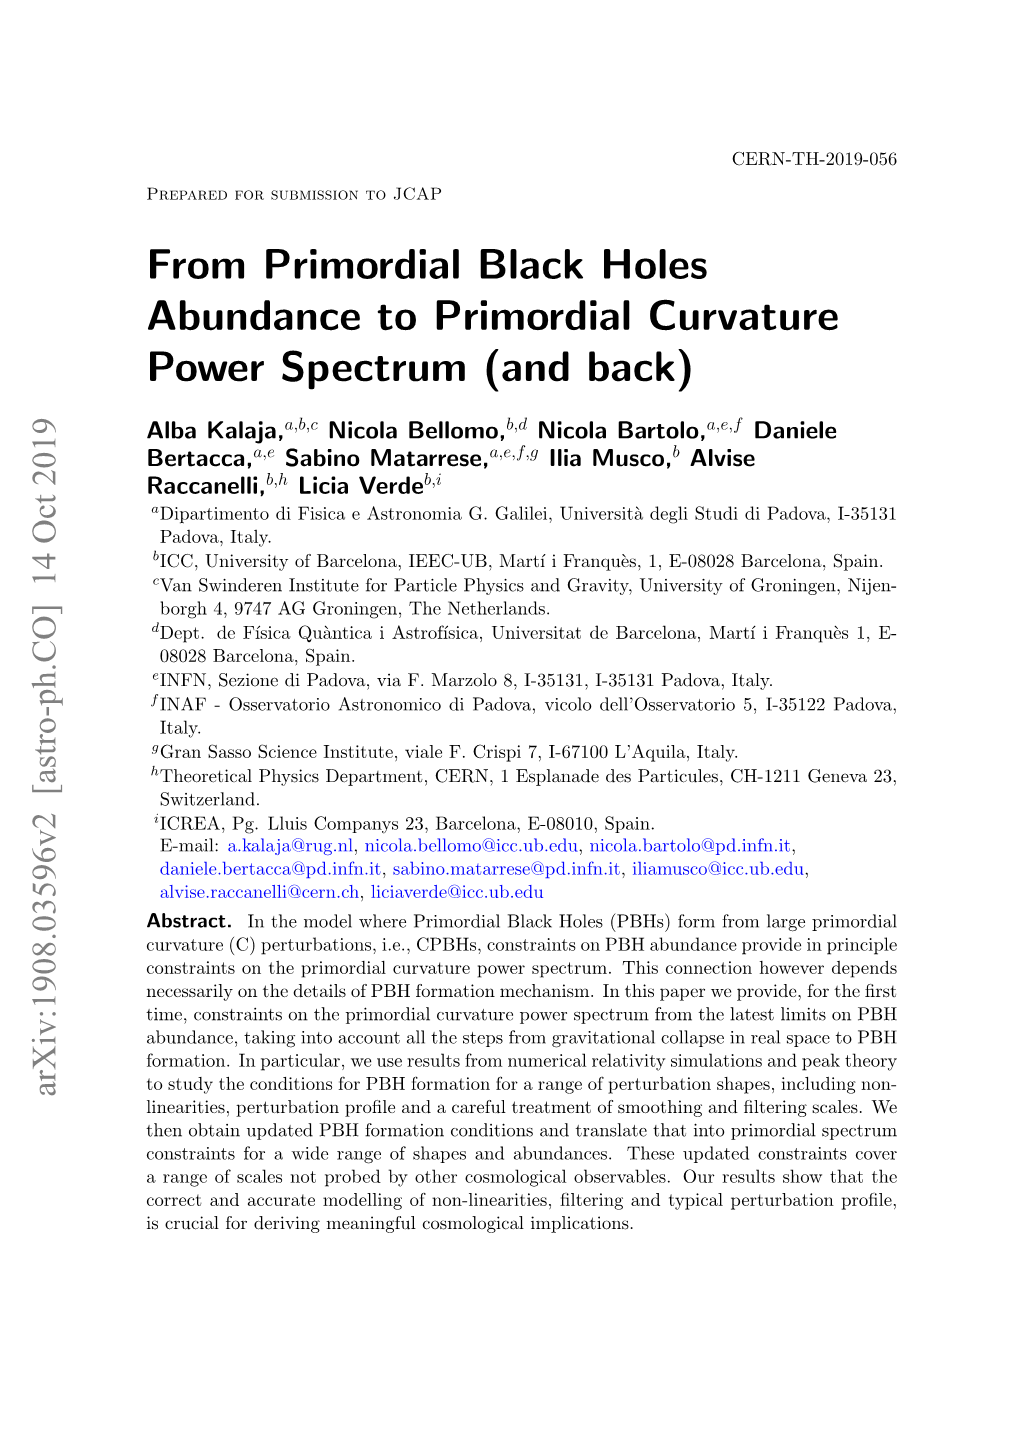 From Primordial Black Holes Abundance to Primordial Curvature Power Spectrum (And Back)